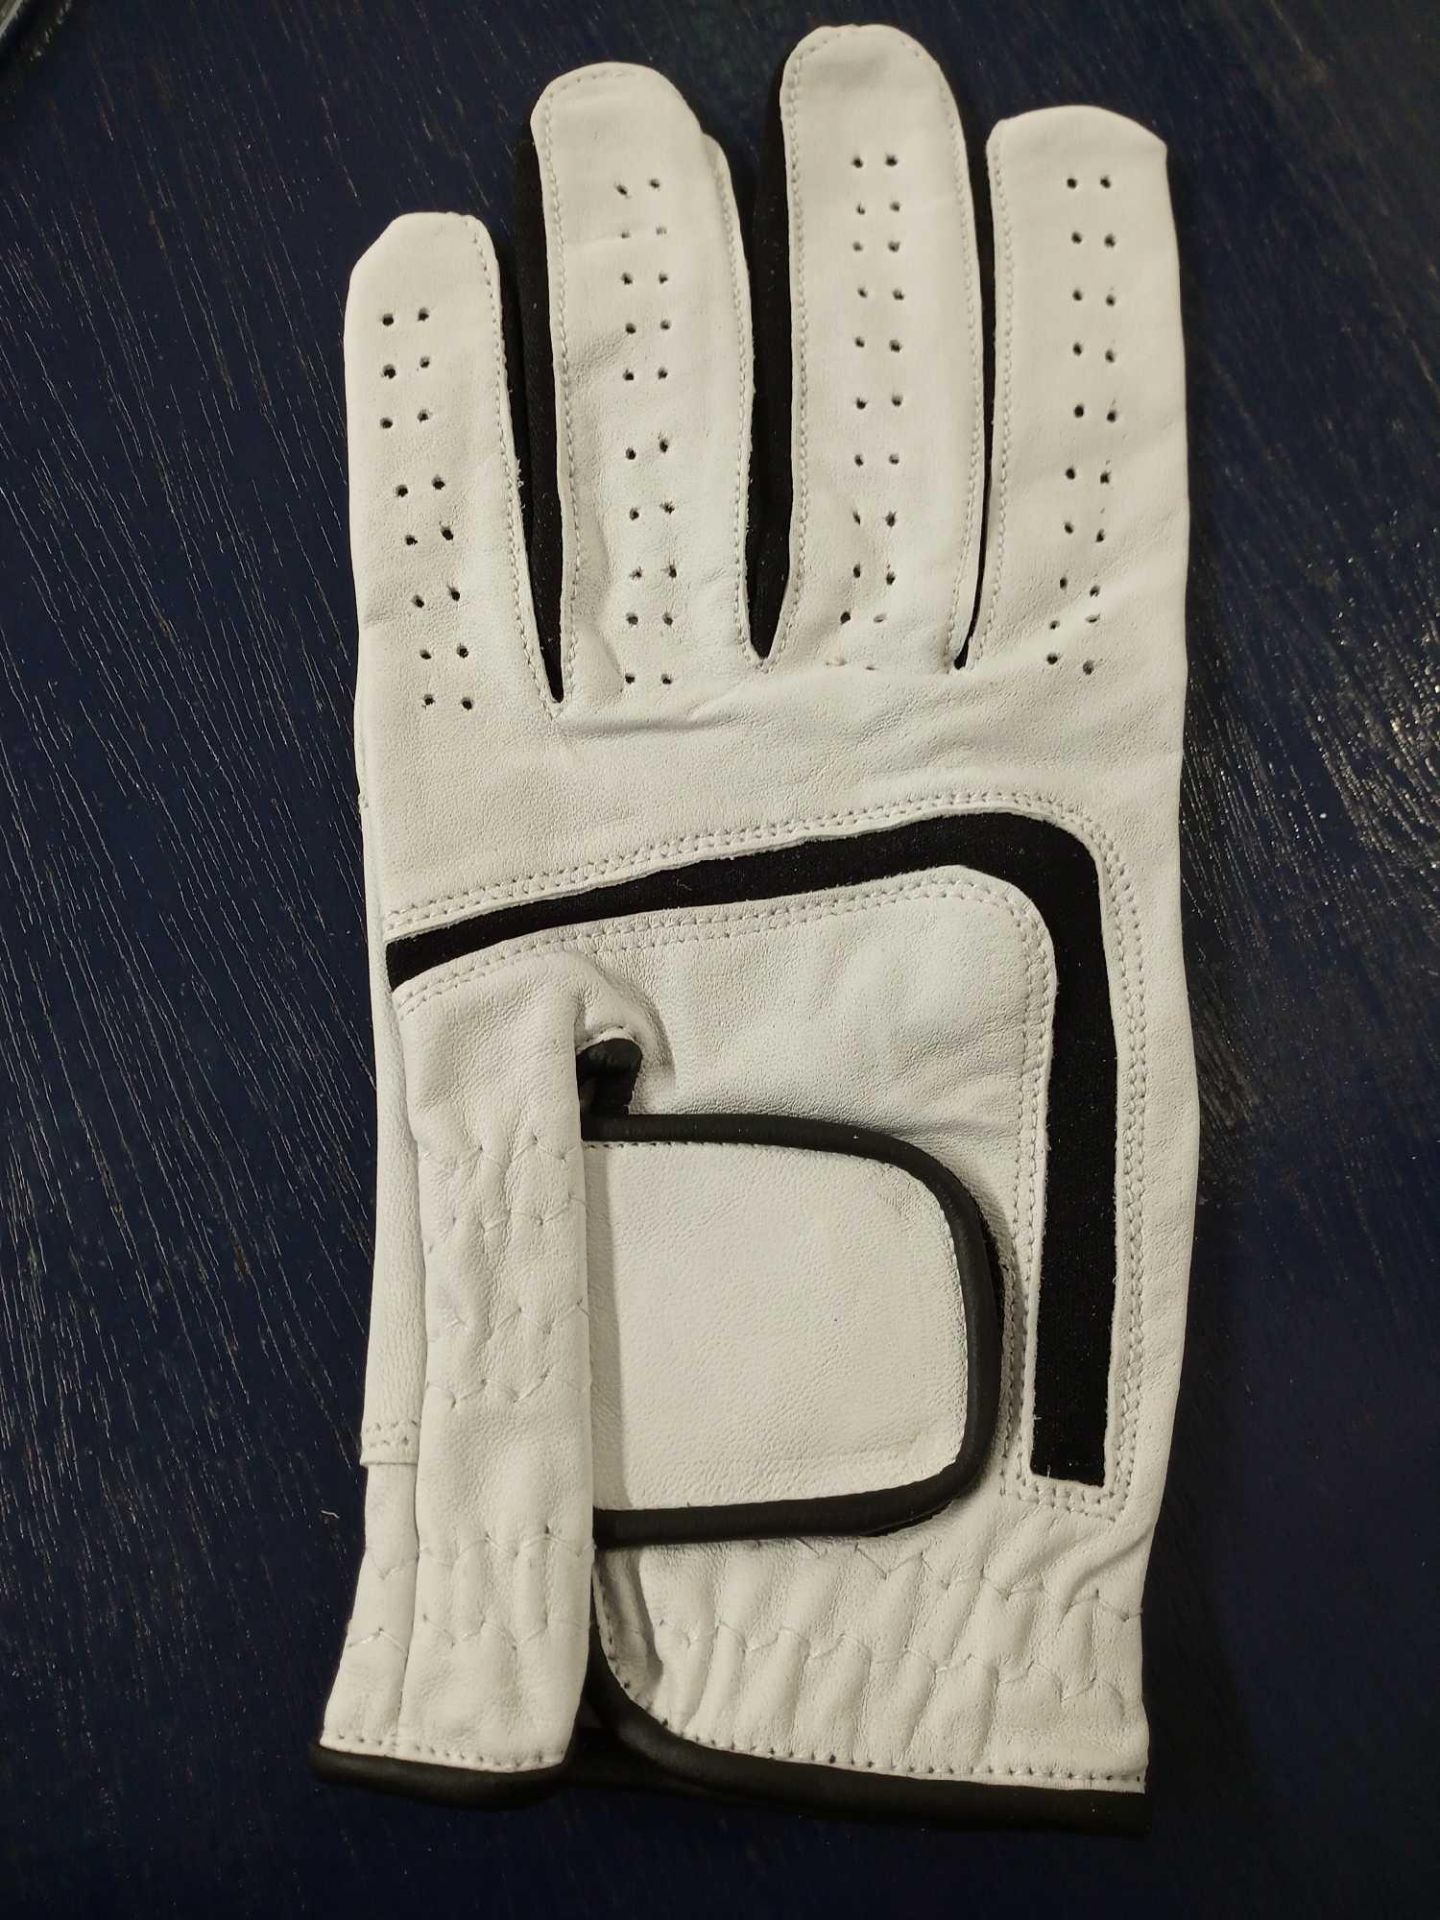 Leather White & Black Golf Glove Xl - Image 2 of 2